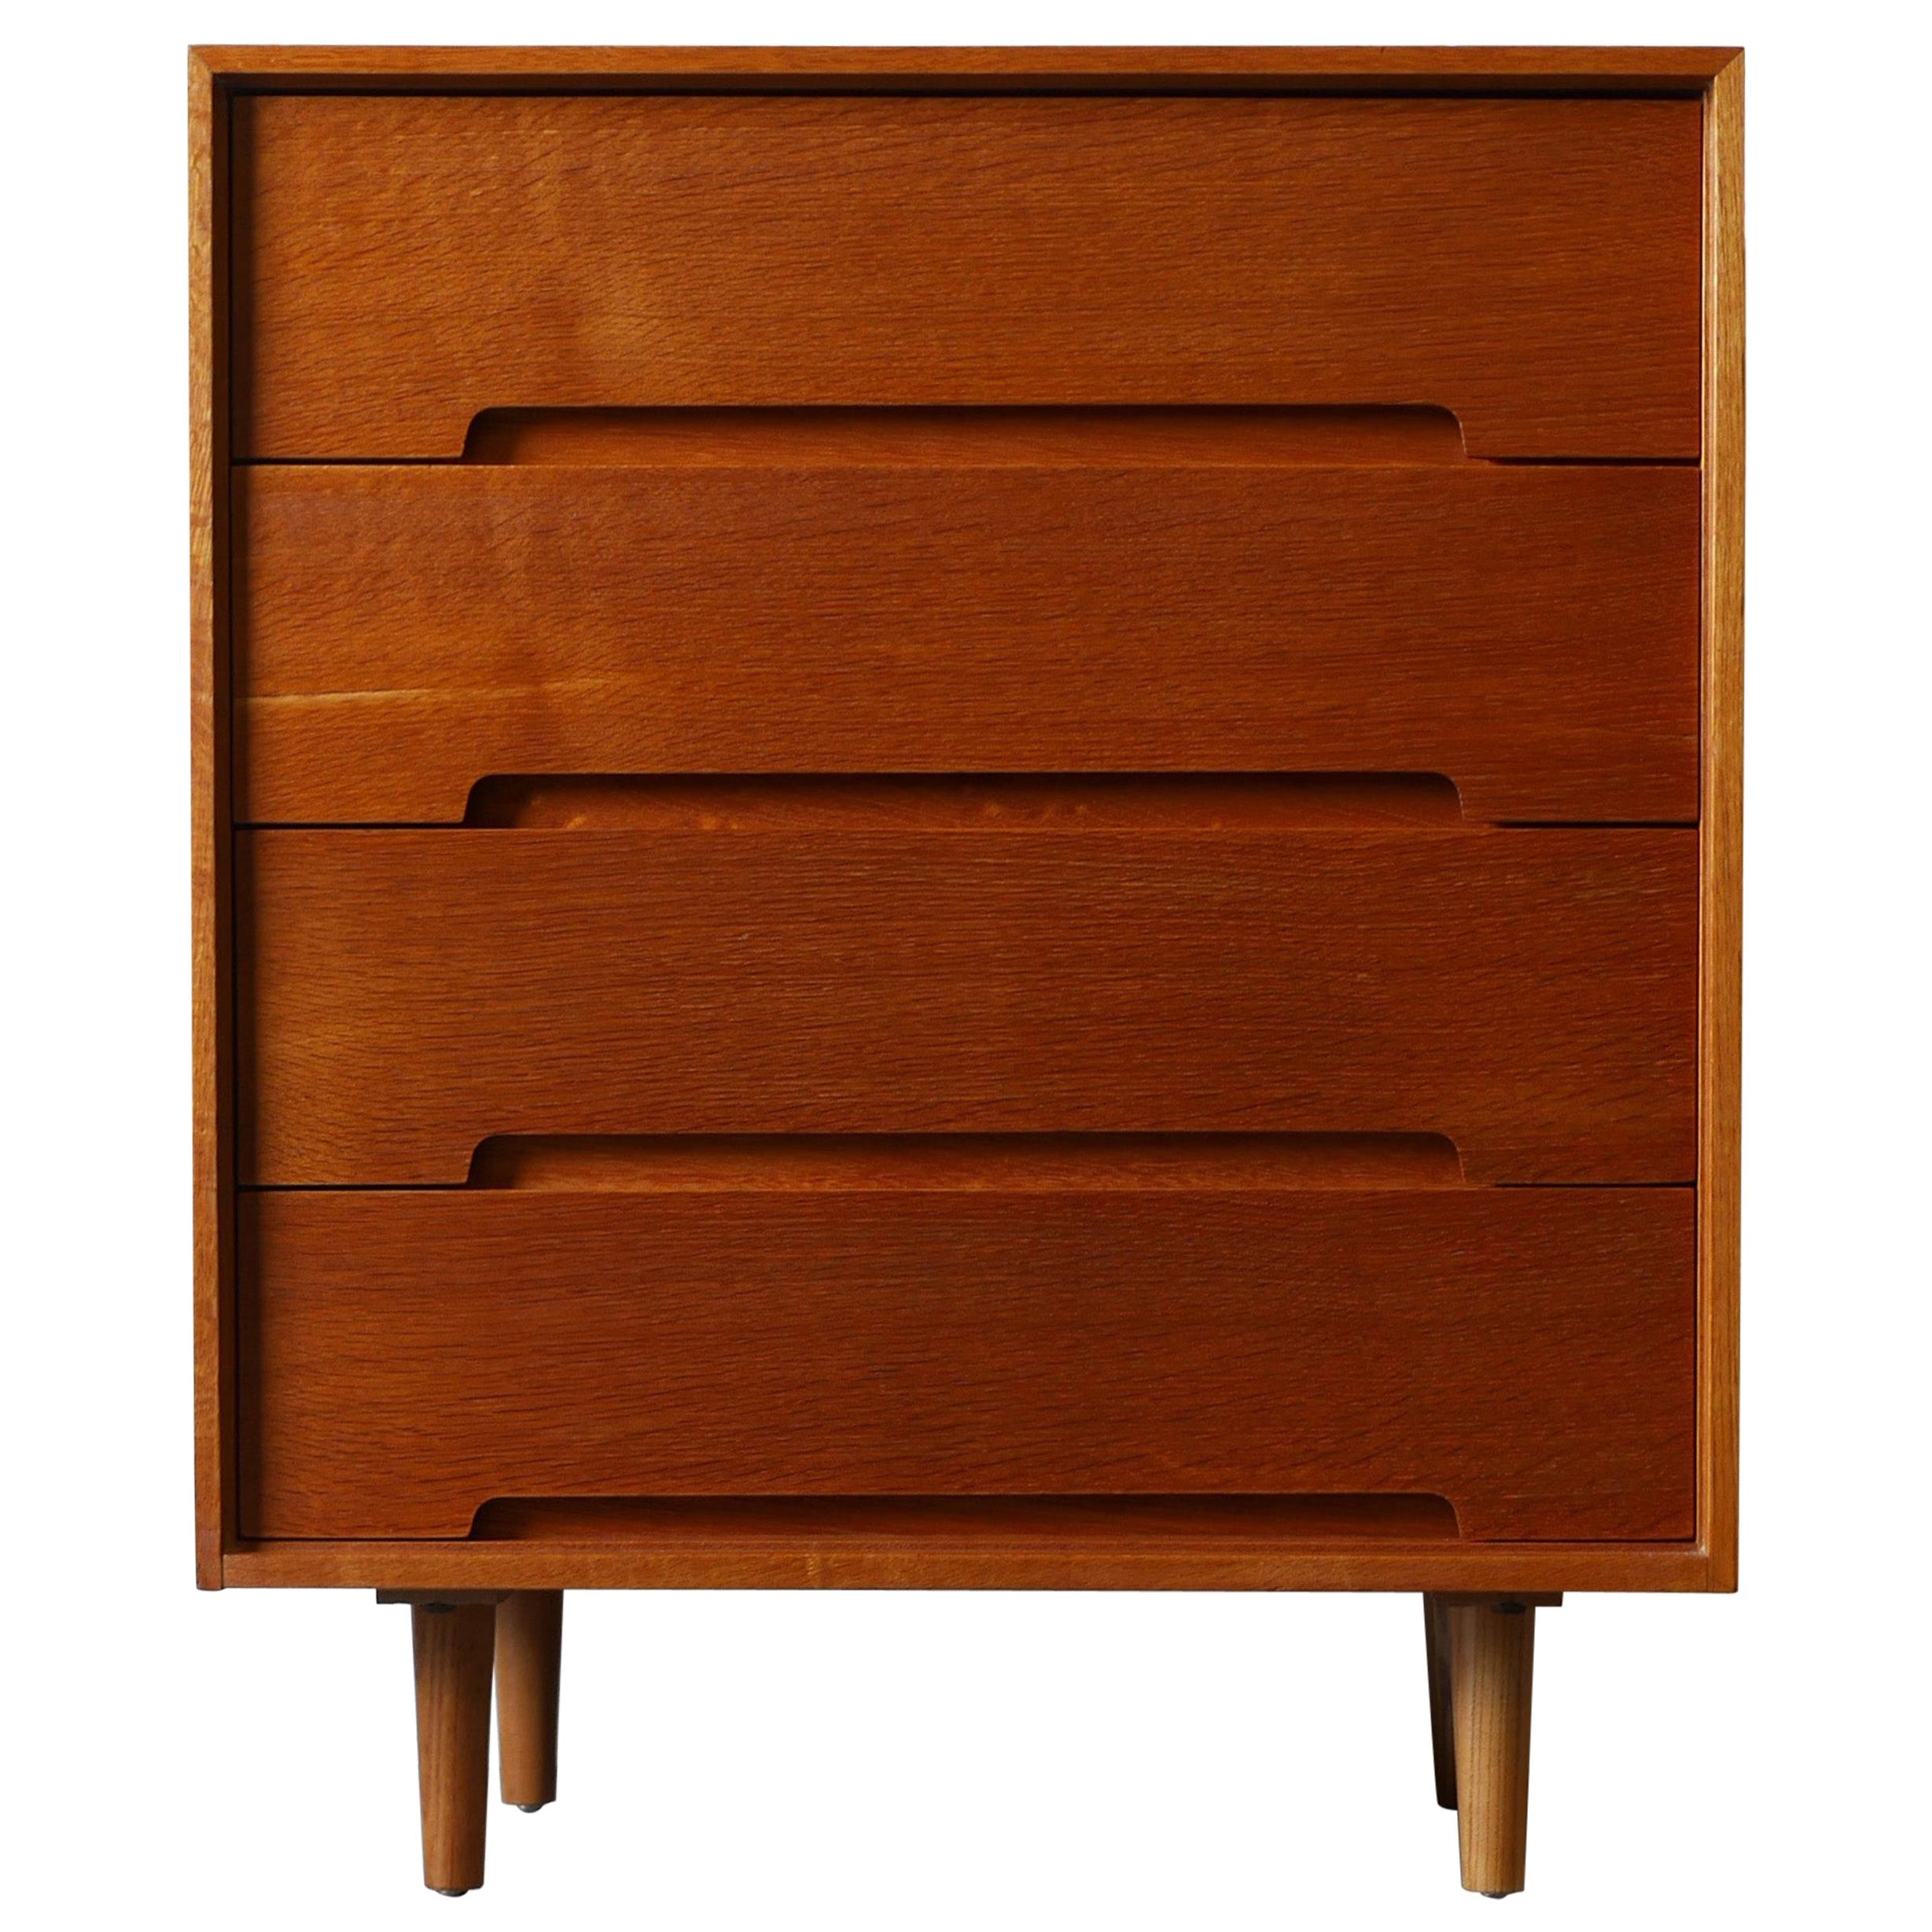 Stag 'C' Range Chest of Four Drawers in Oak by John and Sylvia Reid, circa 1954